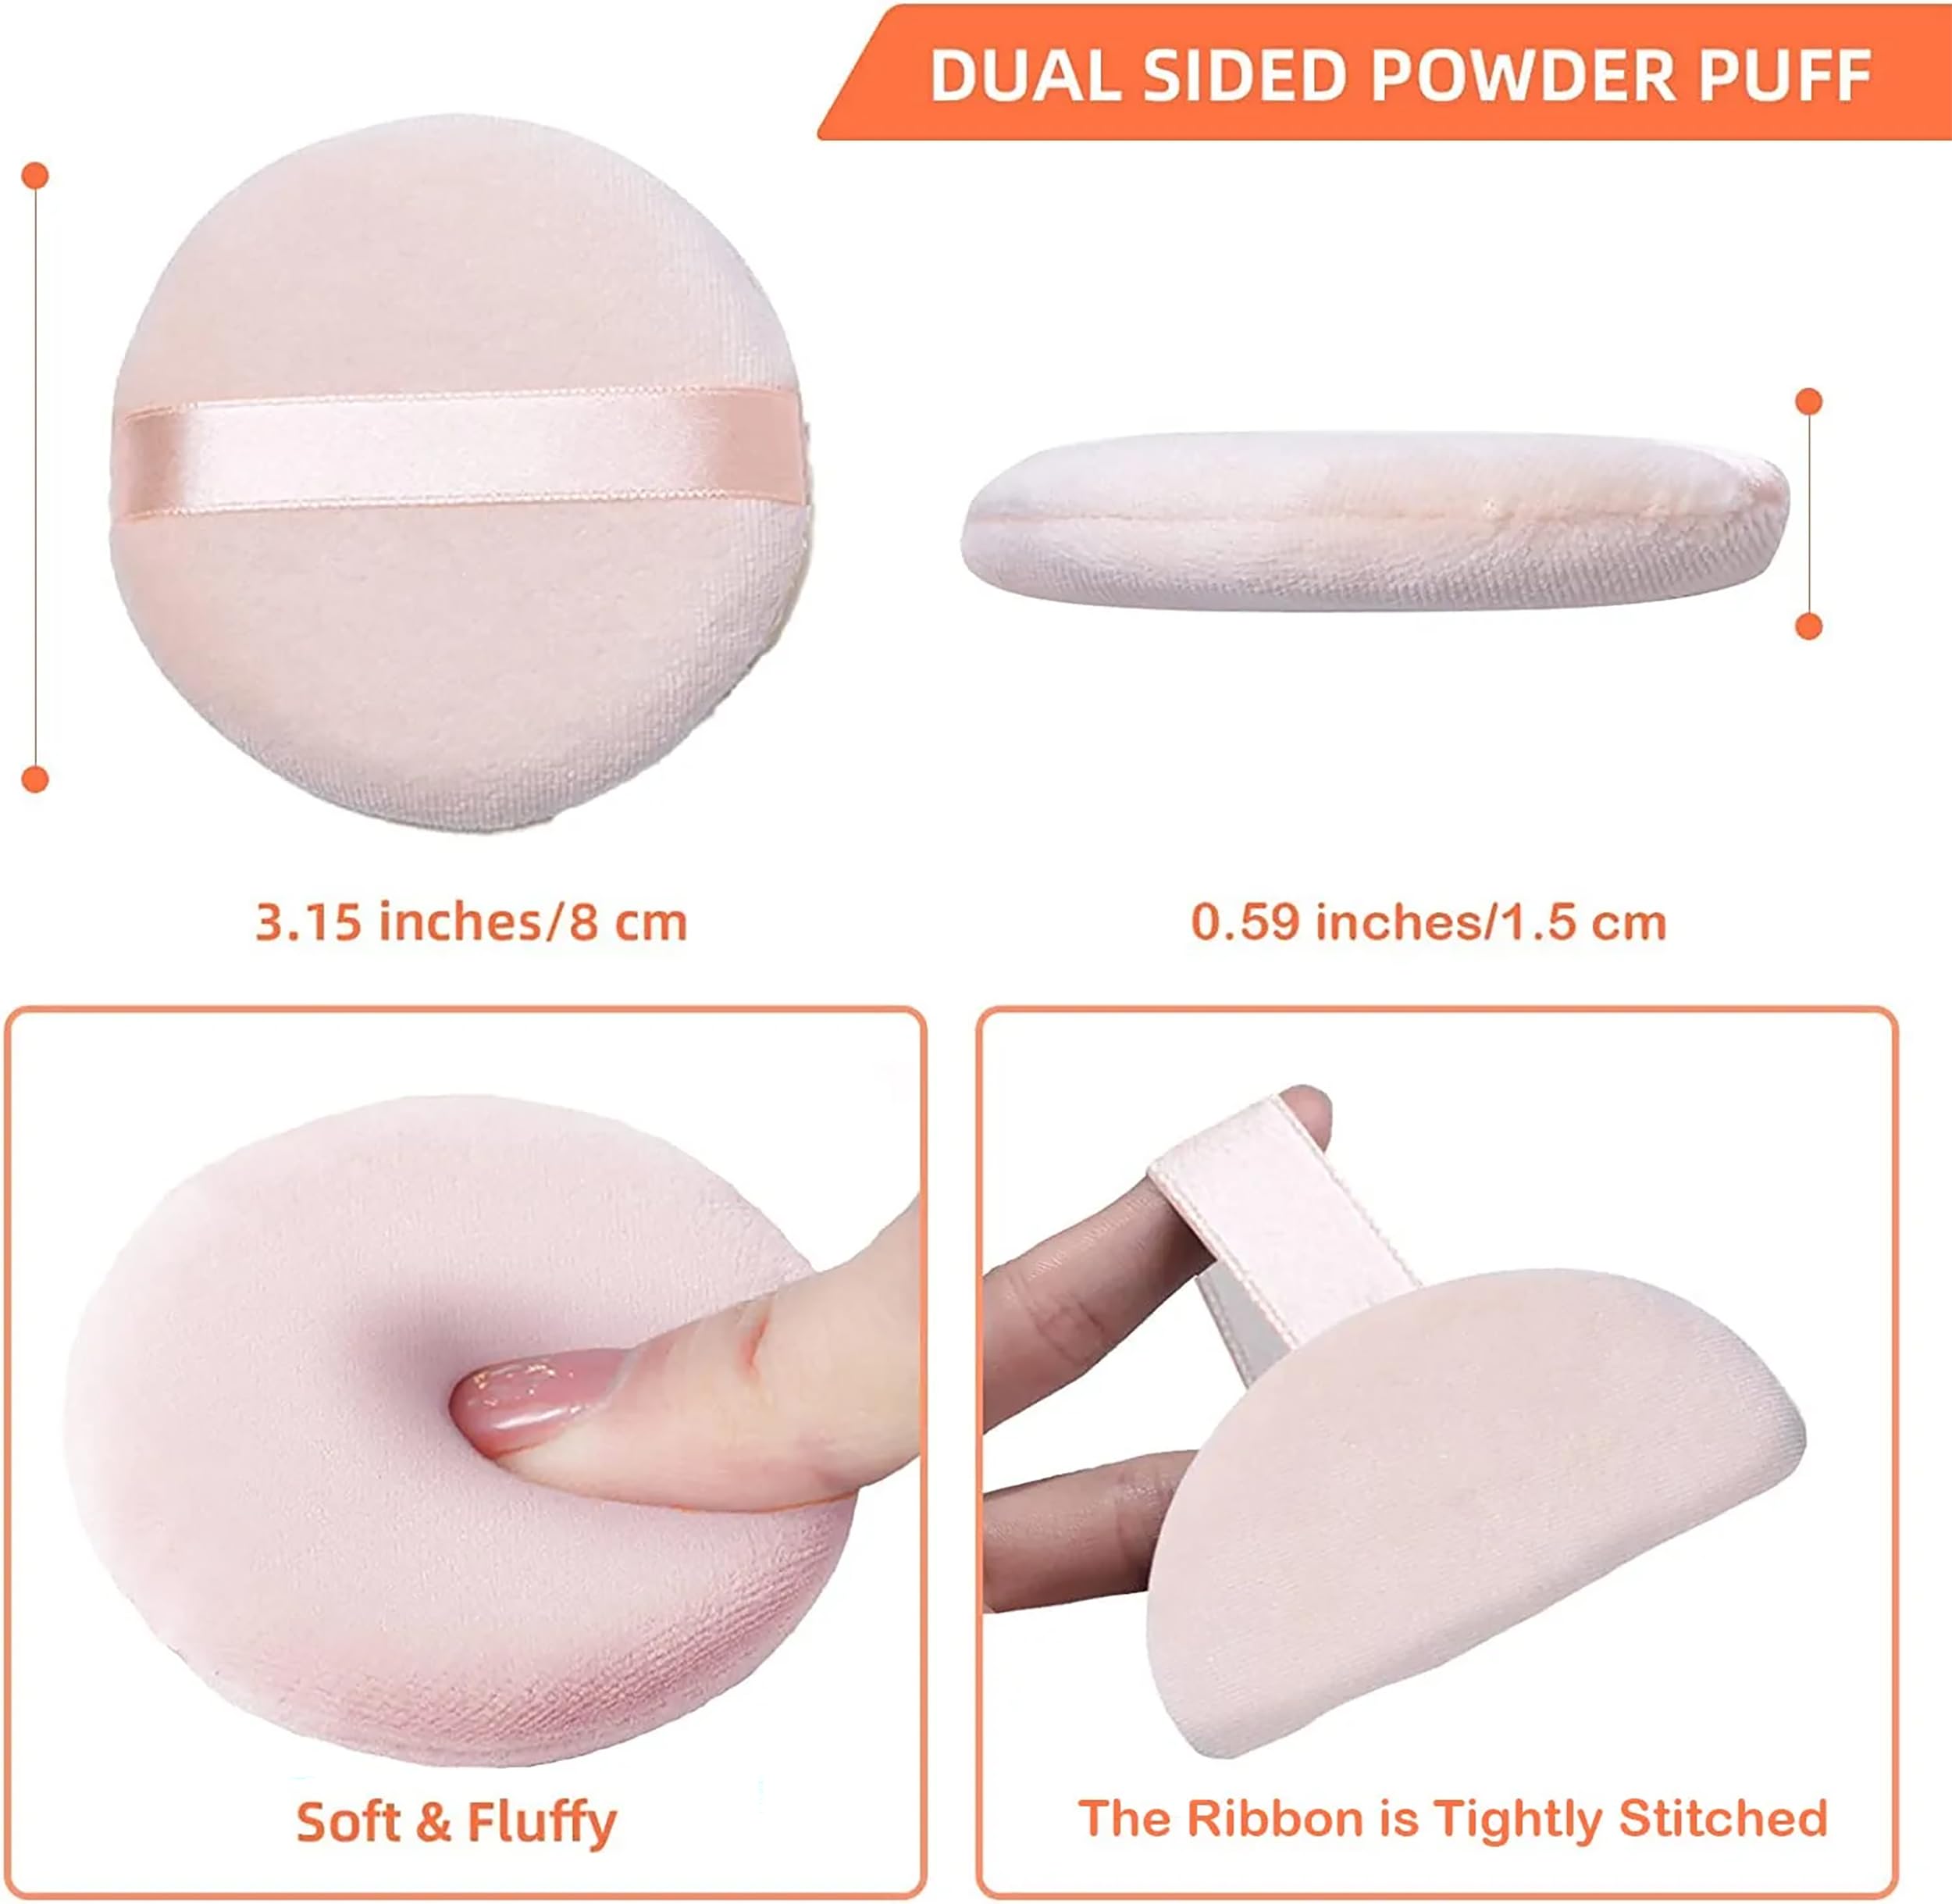 10 Pieces Pure Cotton Powder Puff, Makeup Puff for Powder Foundation, 3.15-inch Normal Size with Strap, Blending for Loose Powder Mineral Powder Body Powder Wet Dry Makeup Tool